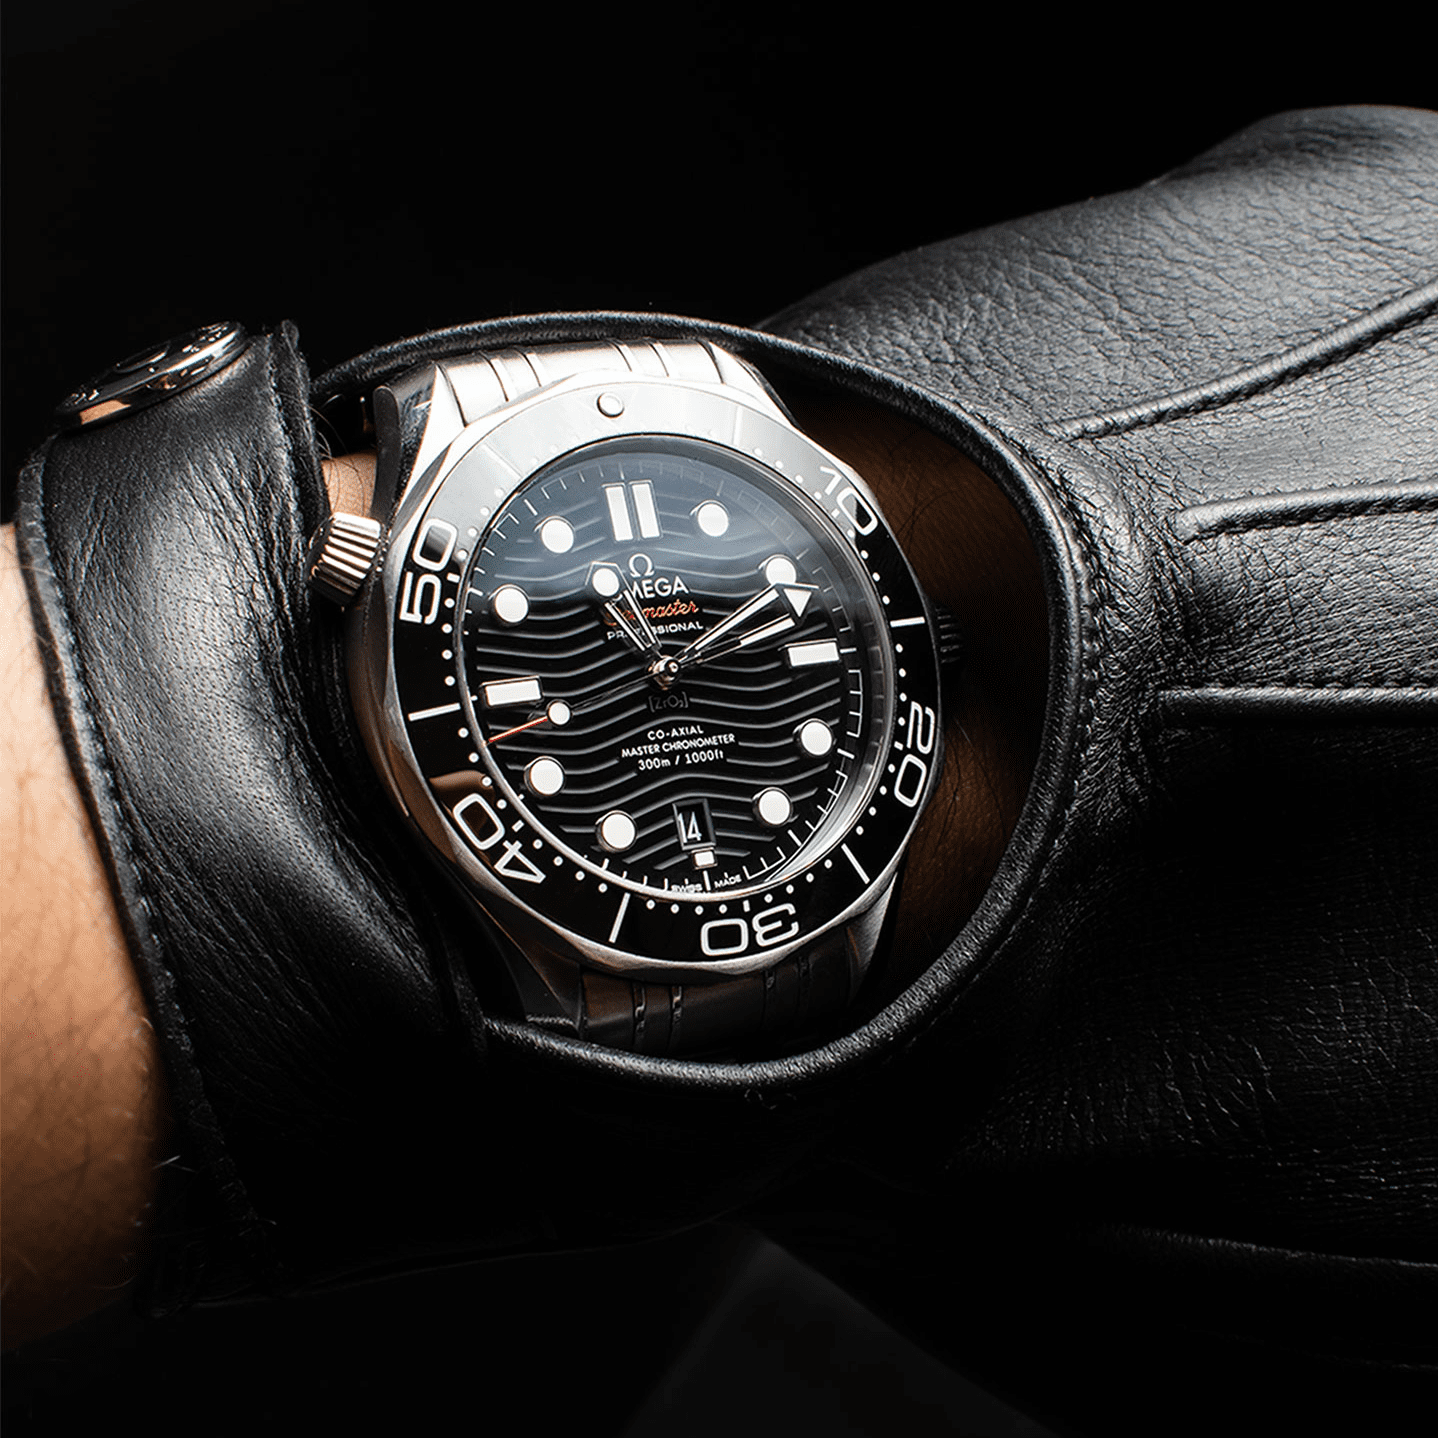 Racing watch owners rejoice: Dents driving gloves are a dream come true